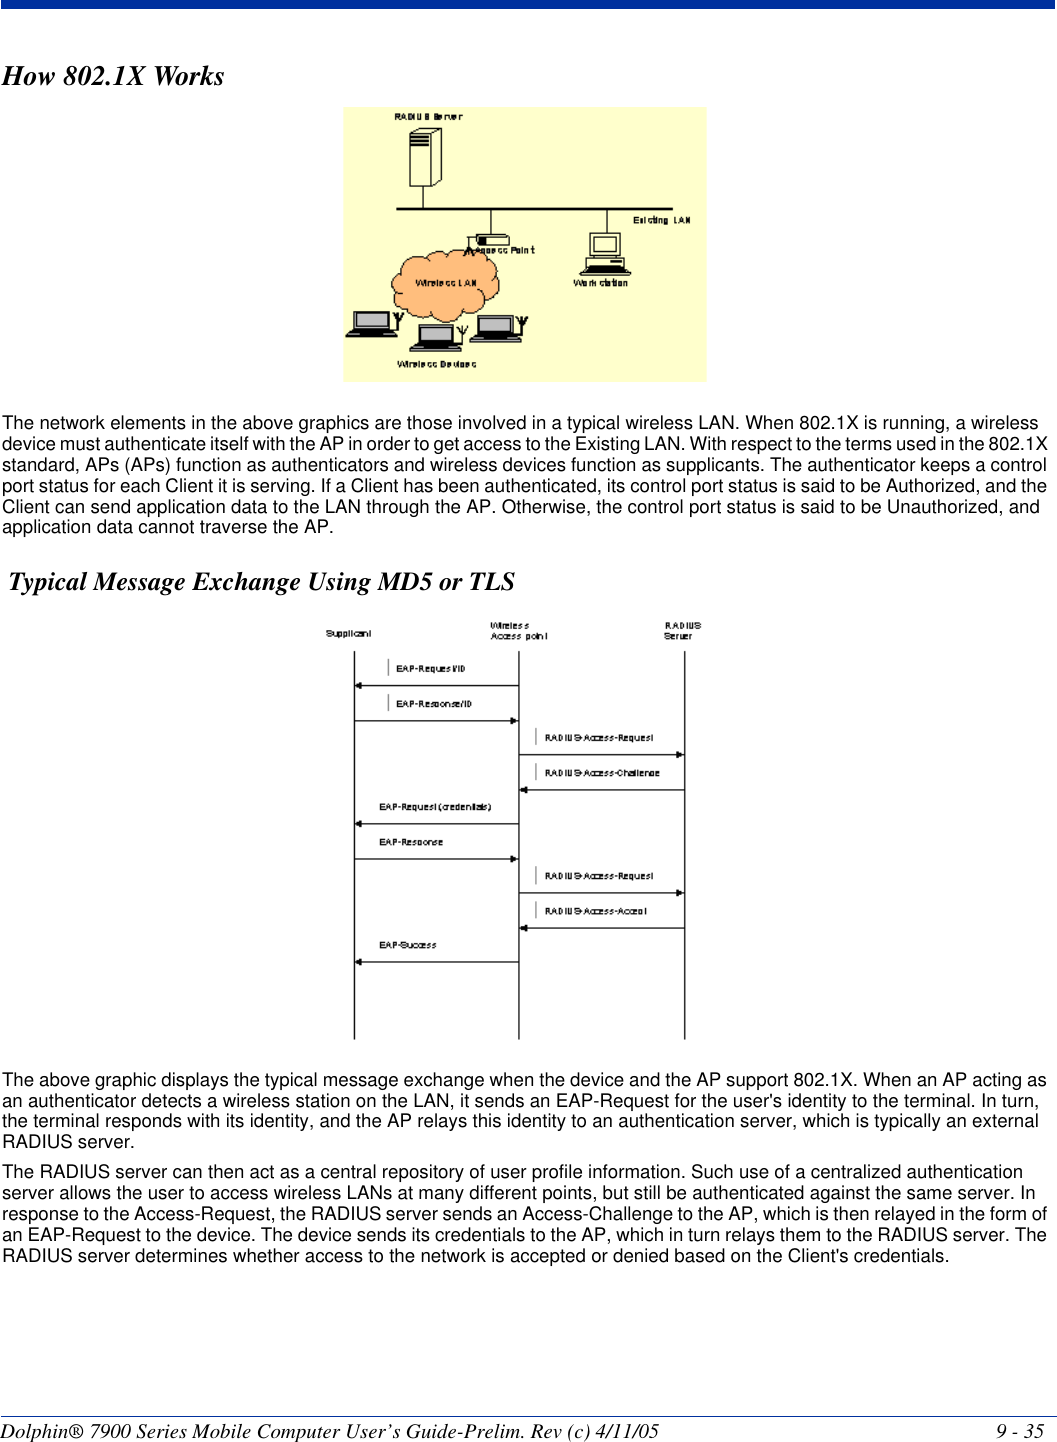 Dolphin® 7900 Series Mobile Computer User’s Guide-Prelim. Rev (c) 4/11/05 9 - 35How 802.1X WorksThe network elements in the above graphics are those involved in a typical wireless LAN. When 802.1X is running, a wireless device must authenticate itself with the AP in order to get access to the Existing LAN. With respect to the terms used in the 802.1X standard, APs (APs) function as authenticators and wireless devices function as supplicants. The authenticator keeps a control port status for each Client it is serving. If a Client has been authenticated, its control port status is said to be Authorized, and the Client can send application data to the LAN through the AP. Otherwise, the control port status is said to be Unauthorized, and application data cannot traverse the AP. Typical Message Exchange Using MD5 or TLSThe above graphic displays the typical message exchange when the device and the AP support 802.1X. When an AP acting as an authenticator detects a wireless station on the LAN, it sends an EAP-Request for the user&apos;s identity to the terminal. In turn, the terminal responds with its identity, and the AP relays this identity to an authentication server, which is typically an external RADIUS server. The RADIUS server can then act as a central repository of user profile information. Such use of a centralized authentication server allows the user to access wireless LANs at many different points, but still be authenticated against the same server. In response to the Access-Request, the RADIUS server sends an Access-Challenge to the AP, which is then relayed in the form of an EAP-Request to the device. The device sends its credentials to the AP, which in turn relays them to the RADIUS server. The RADIUS server determines whether access to the network is accepted or denied based on the Client&apos;s credentials.